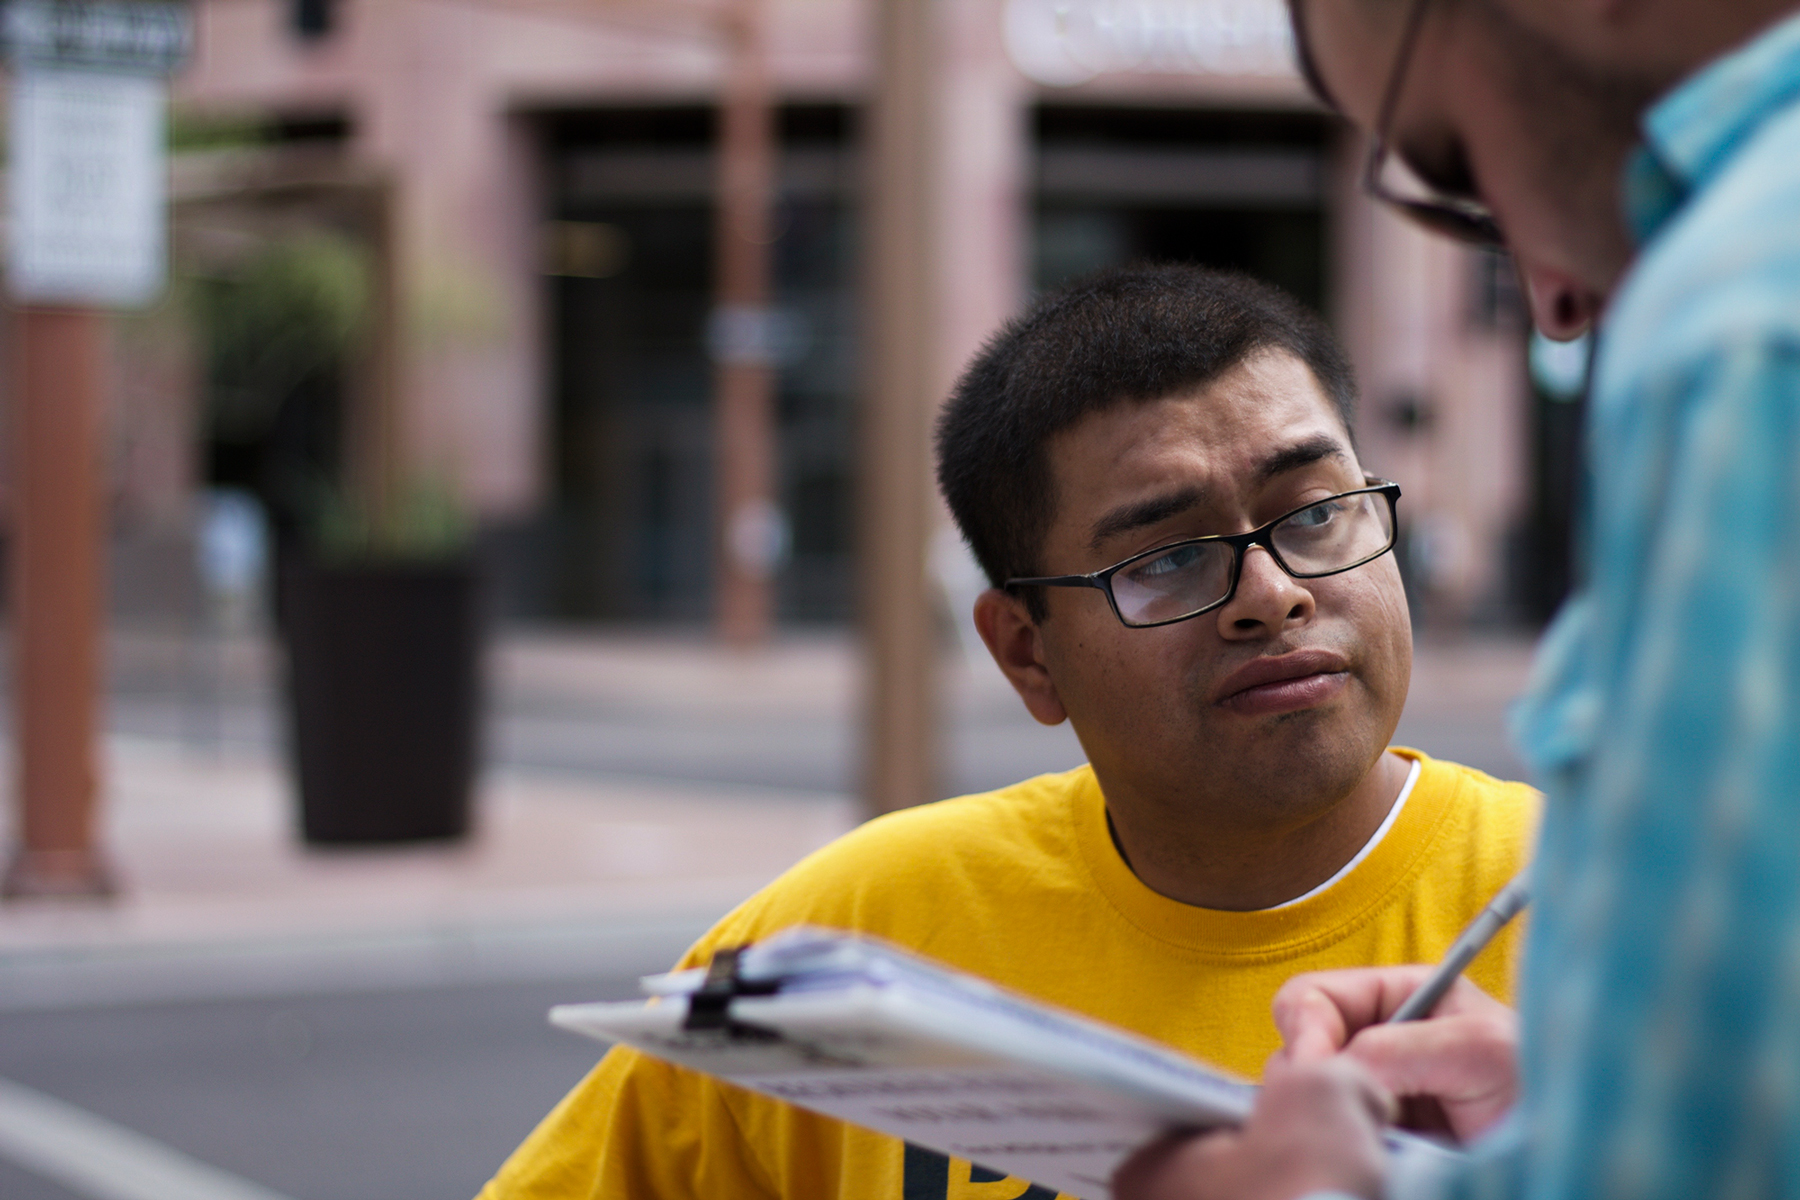 Jose Barboza, a Promise Arizona volunteer, registers voters in Phoenix. Thirteen cases of double voting were prosecuted in the state since 2012. (Courtney Columbus/News21)